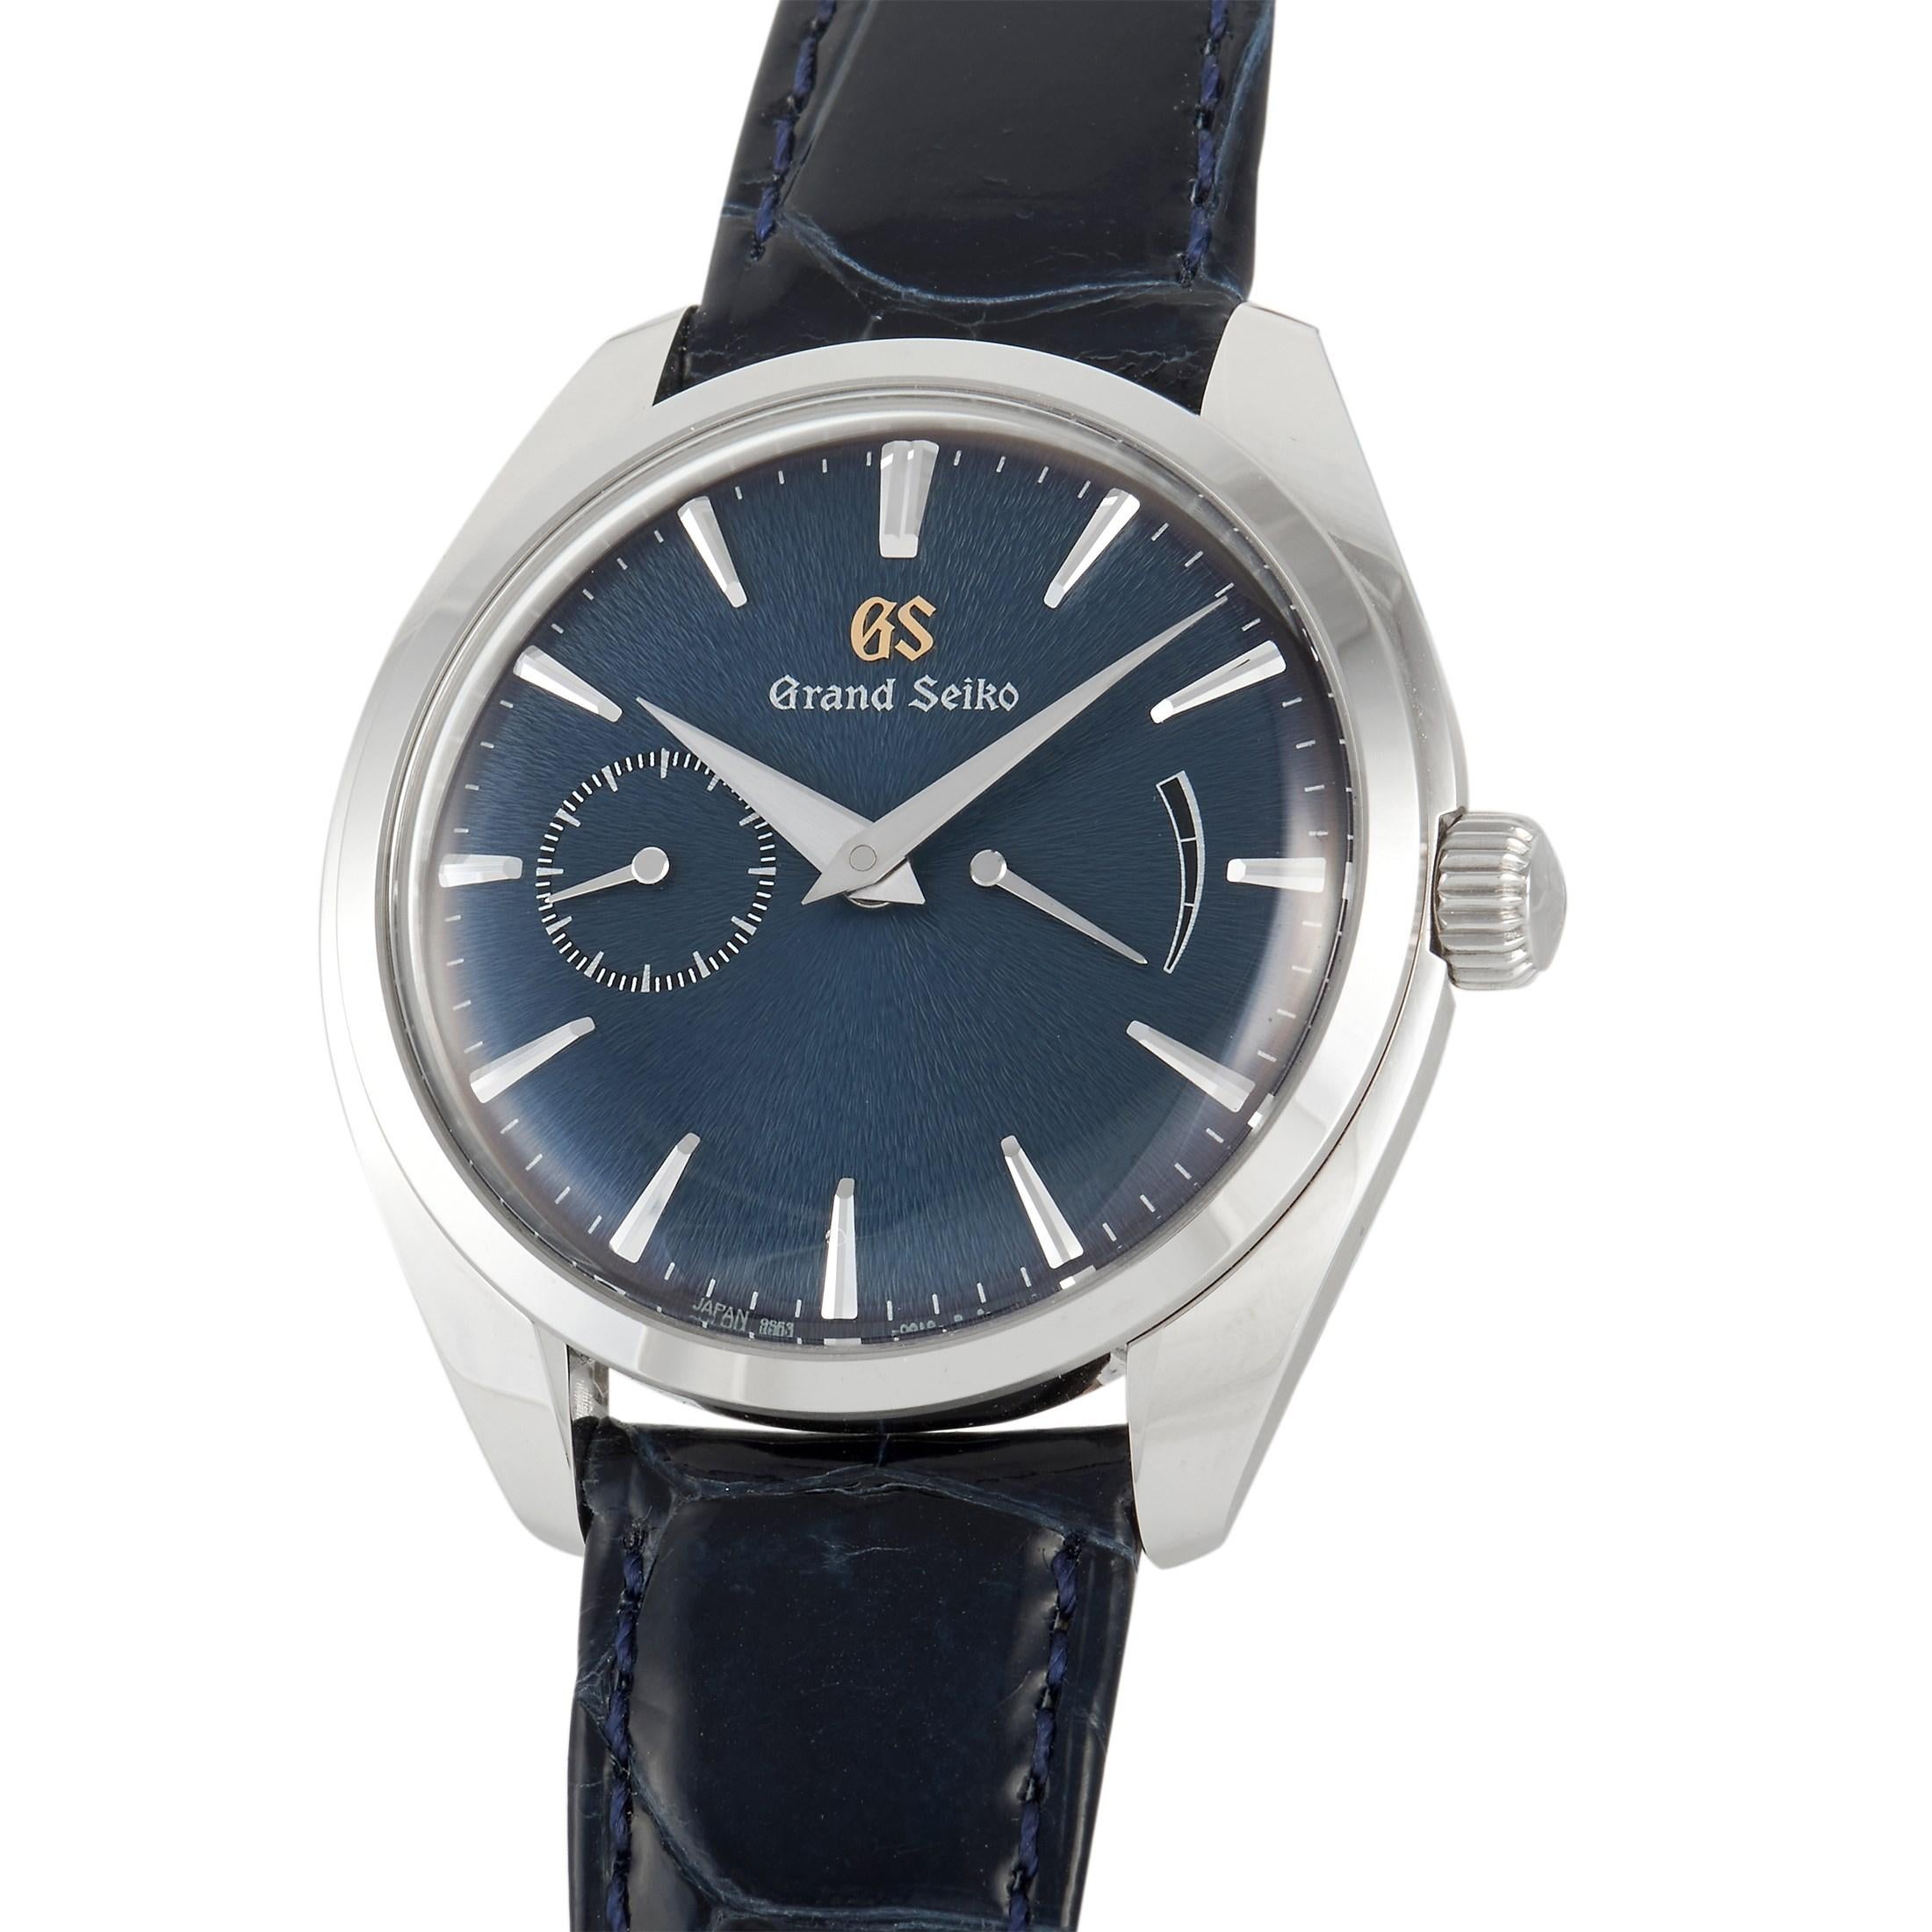 The Grand Seiko Watch, reference number SBGK005, is an upscale piece that exudes a timeless sense of sophistication. 

The beauty of this timepiece begins with the polished stainless steel 39mm case. It houses a captivating blue Mt. Iwate patterned